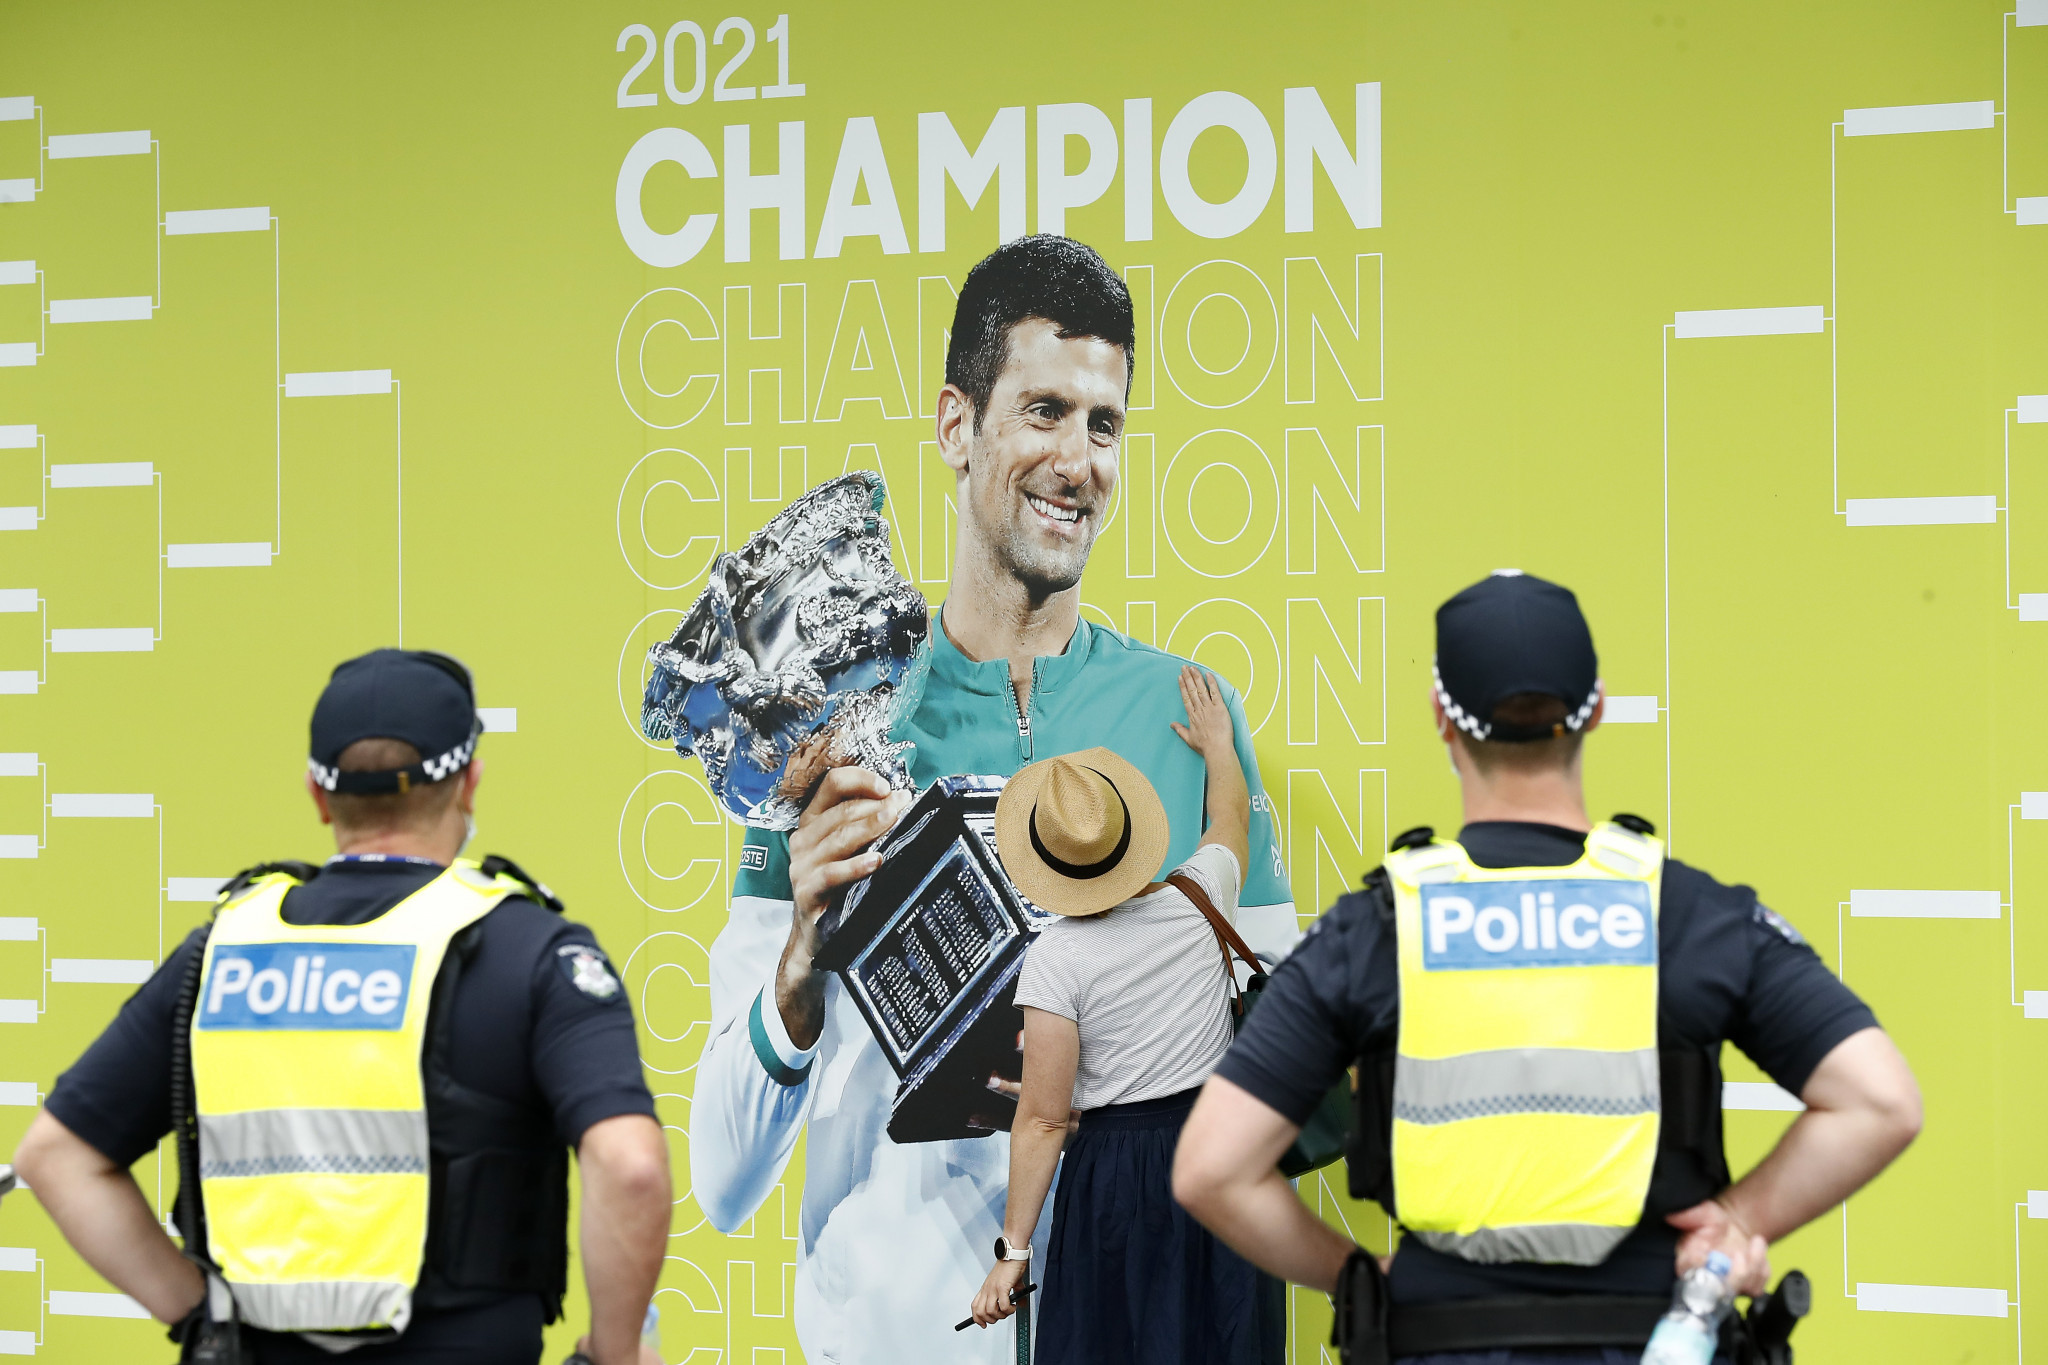 Djokovic set to be barred from French Open if unvaccinated as three-year Australia ban looms